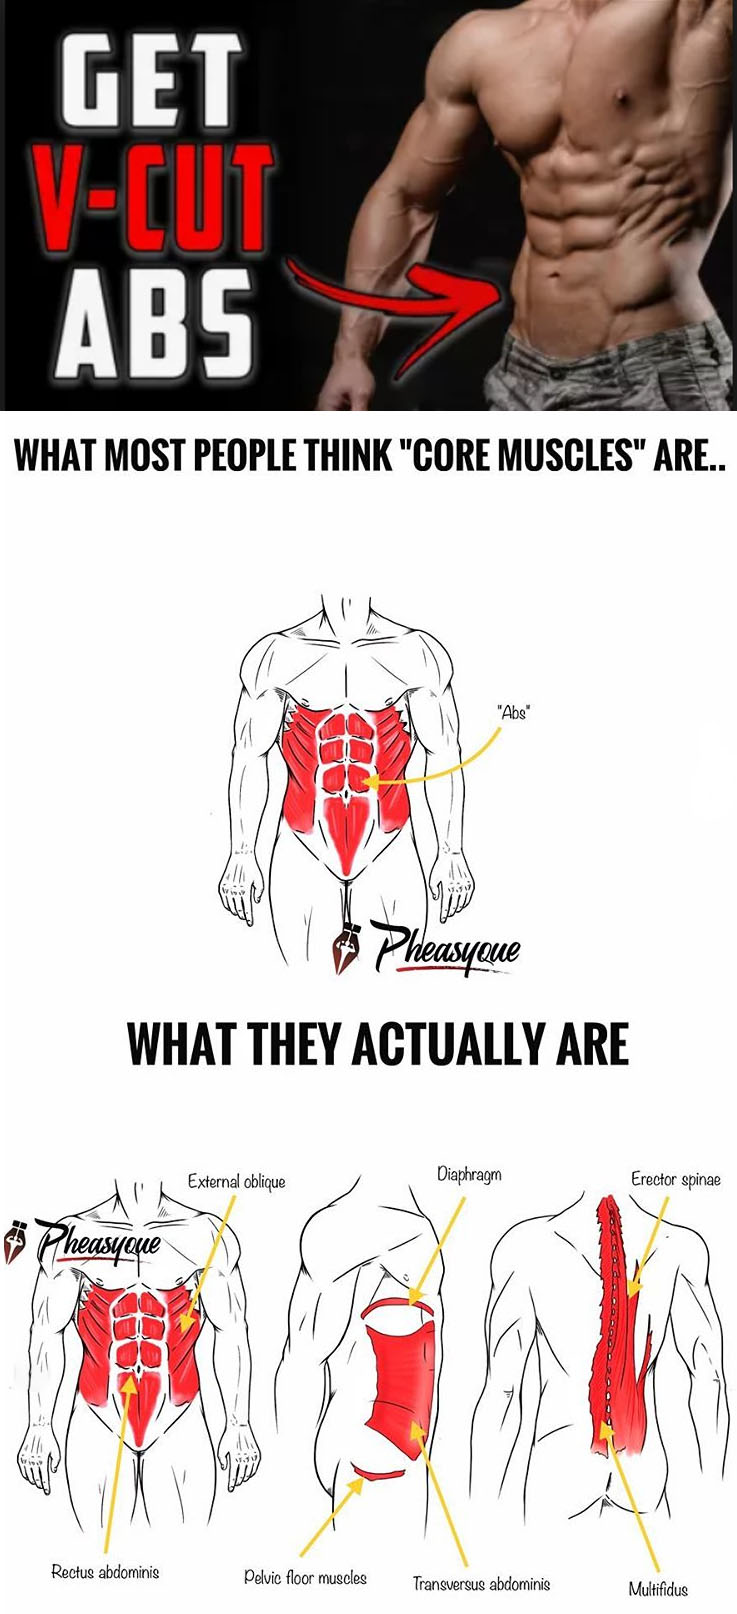 HOW TO CORE MUSCLES 